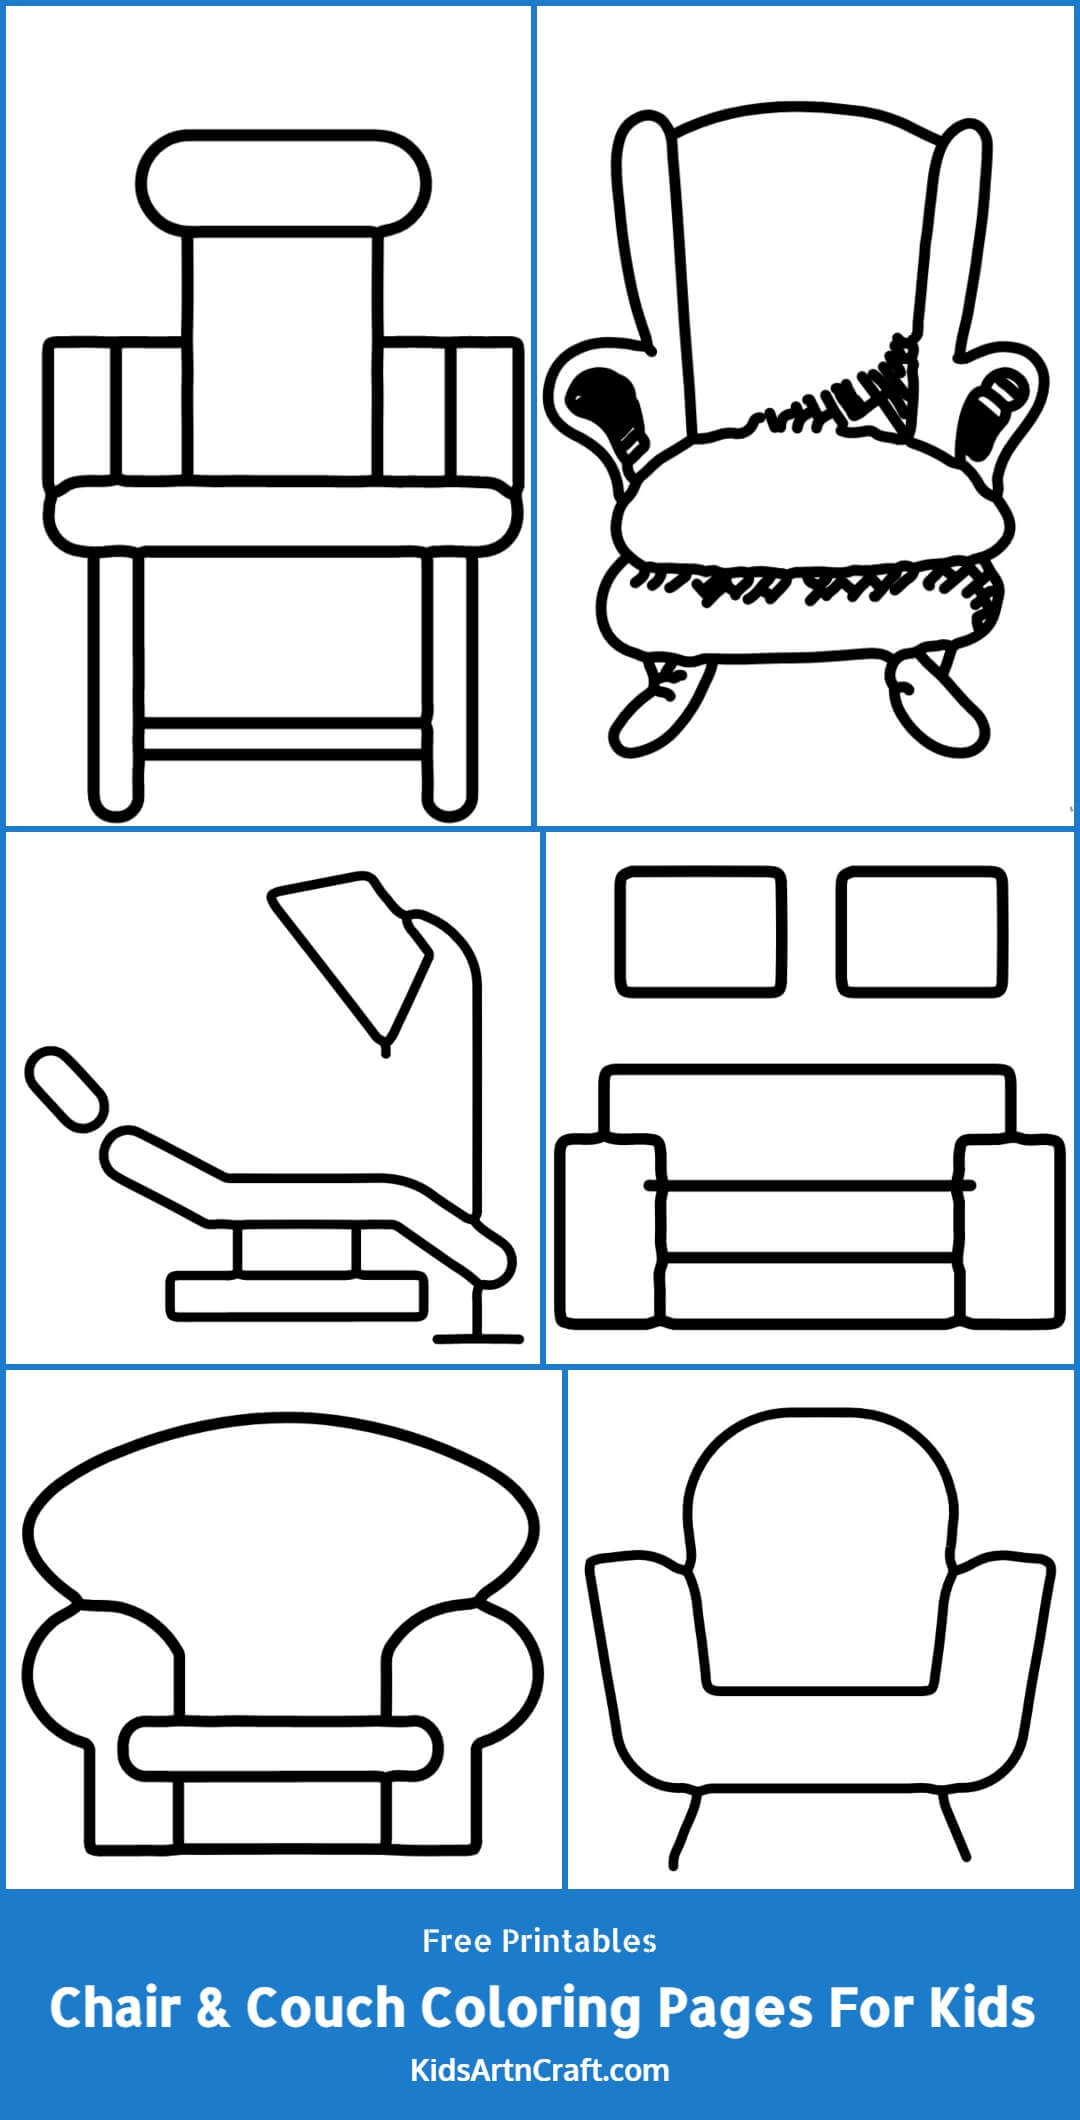 Couch Coloring Pages For Kids – Free Printables - Kids Art & Craft